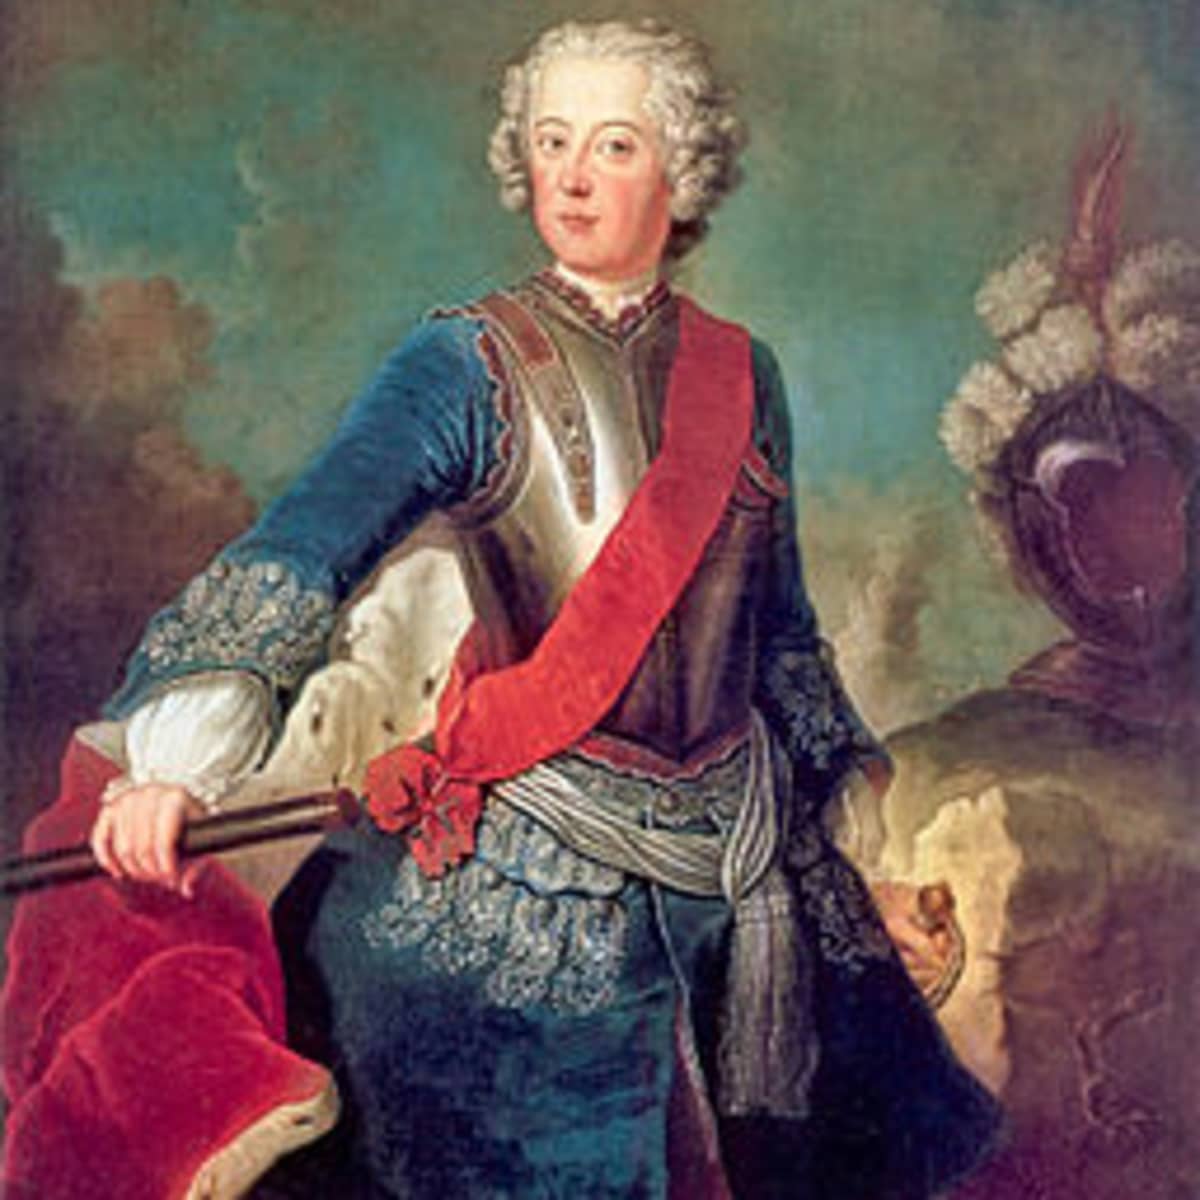 Frederick the Great and Joseph II: Enlightened Despots? - HubPages